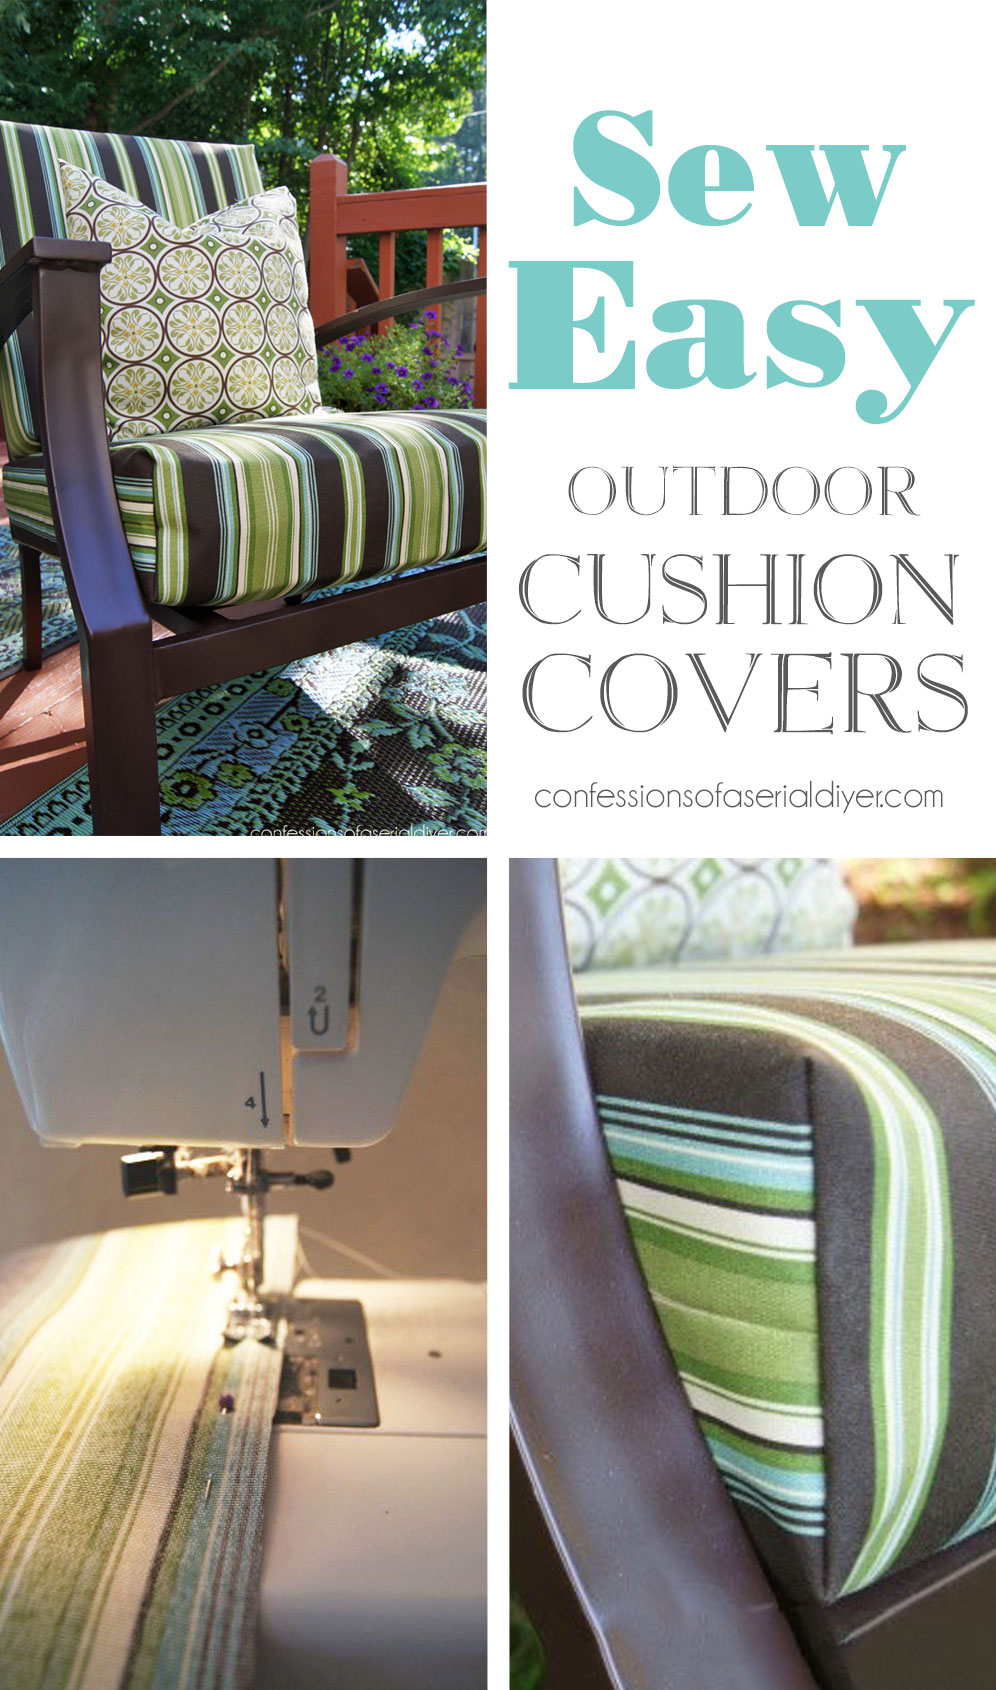 Sew Easy Outdoor Cushion Covers, How To Remove Mold From Outdoor Cushion Covers